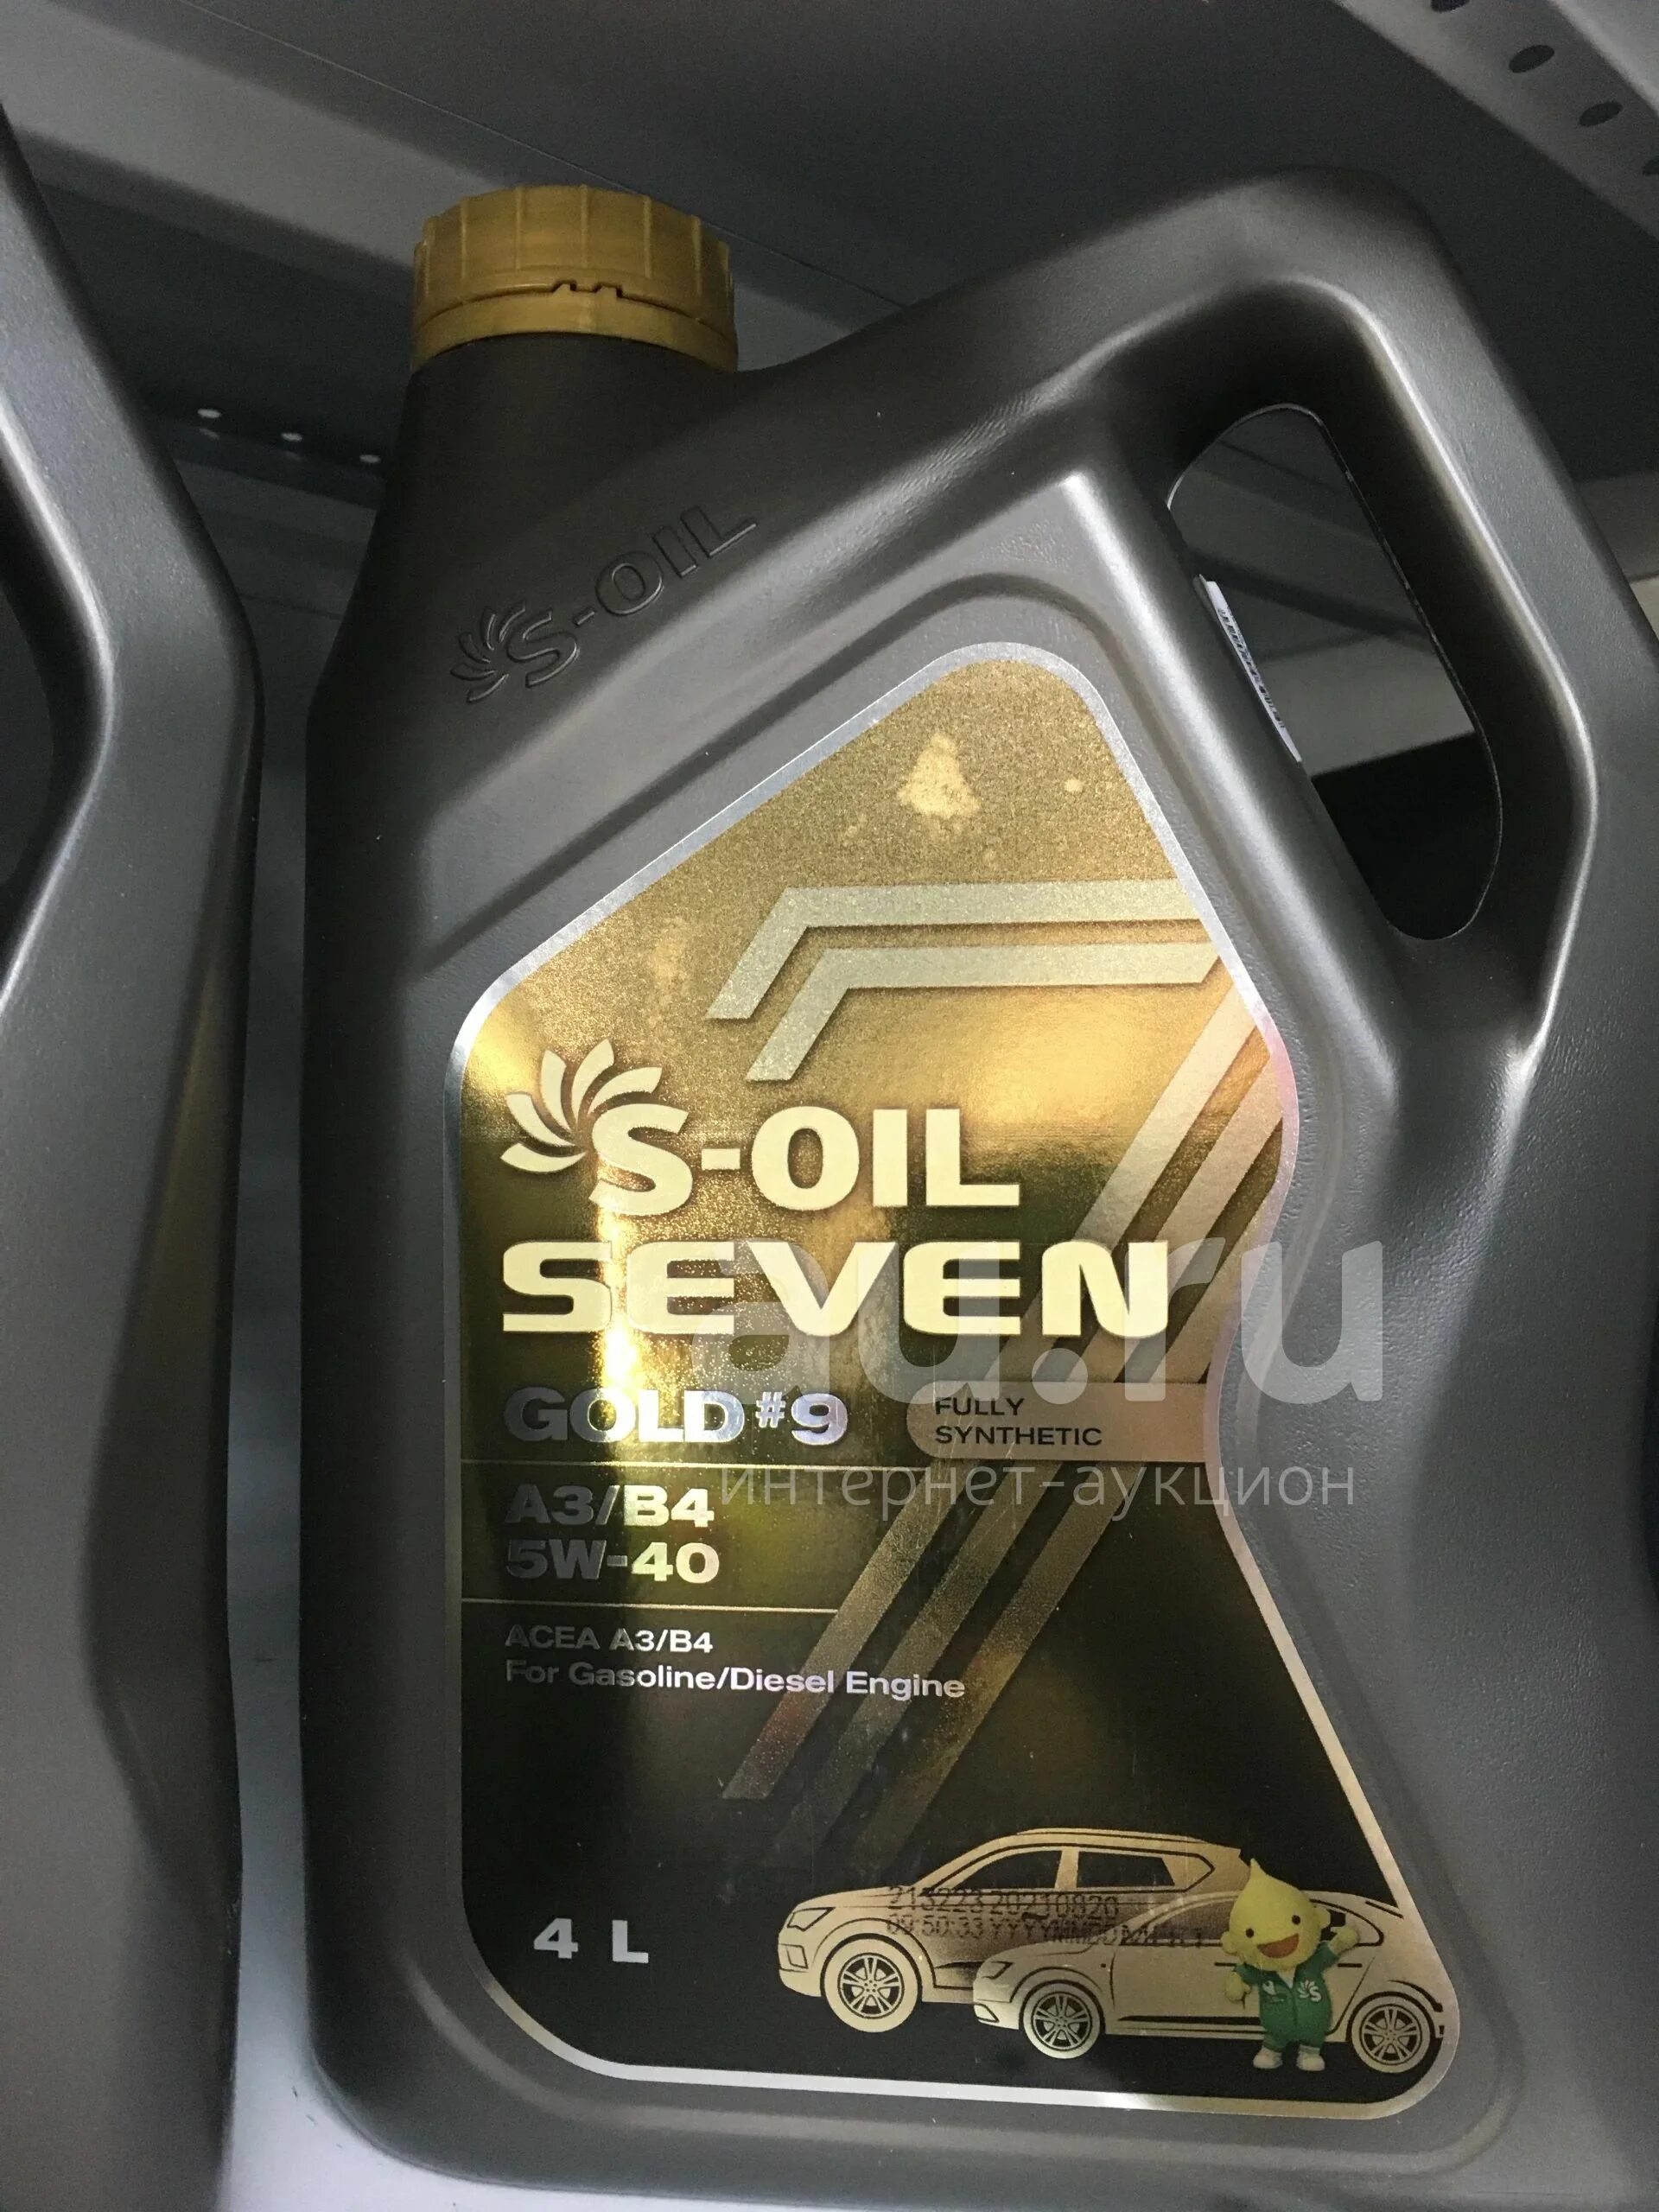 S-Oil Seven Gold #9 5w-30 a5/b5. S-Oil 7 Gold #9 a3/b4 5w40. S-Oil 7 Gold #9 c5 0w20. S-Oil Seven gold9 a3/b4 SN 10w40 синтетика (20л.). Моторное масло gold 5w30